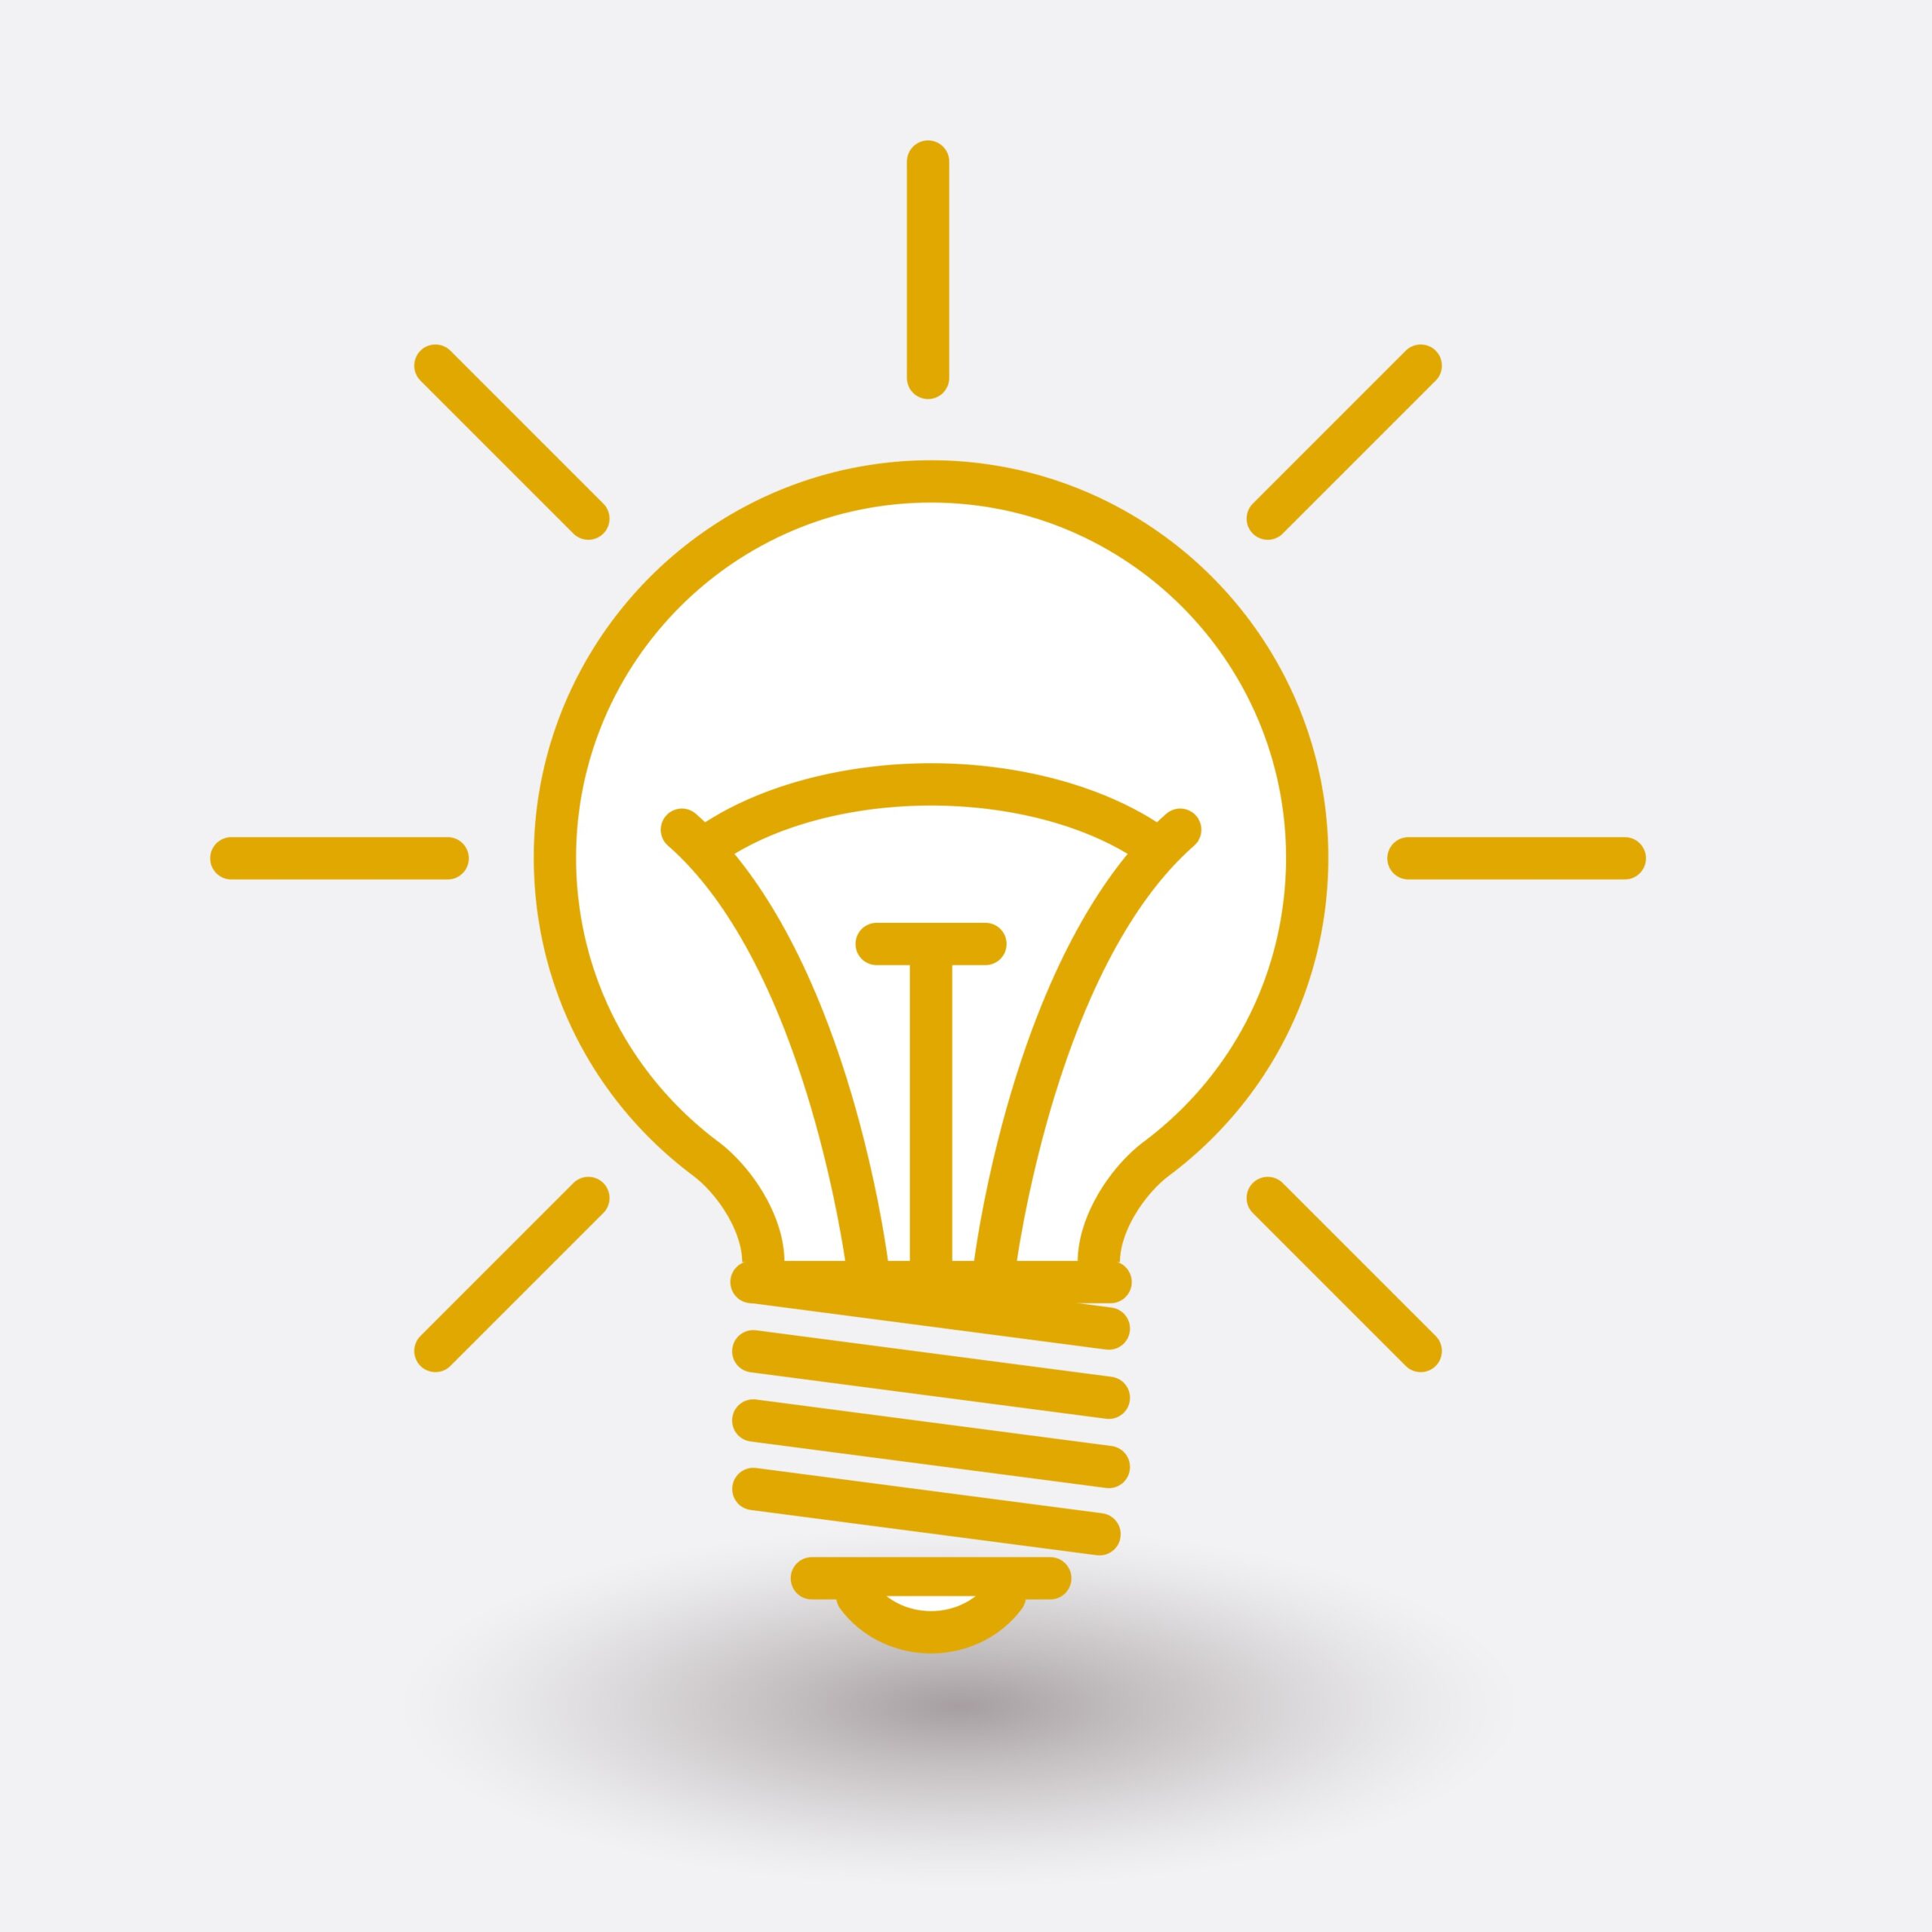 Your bright idea! Is it patentable?